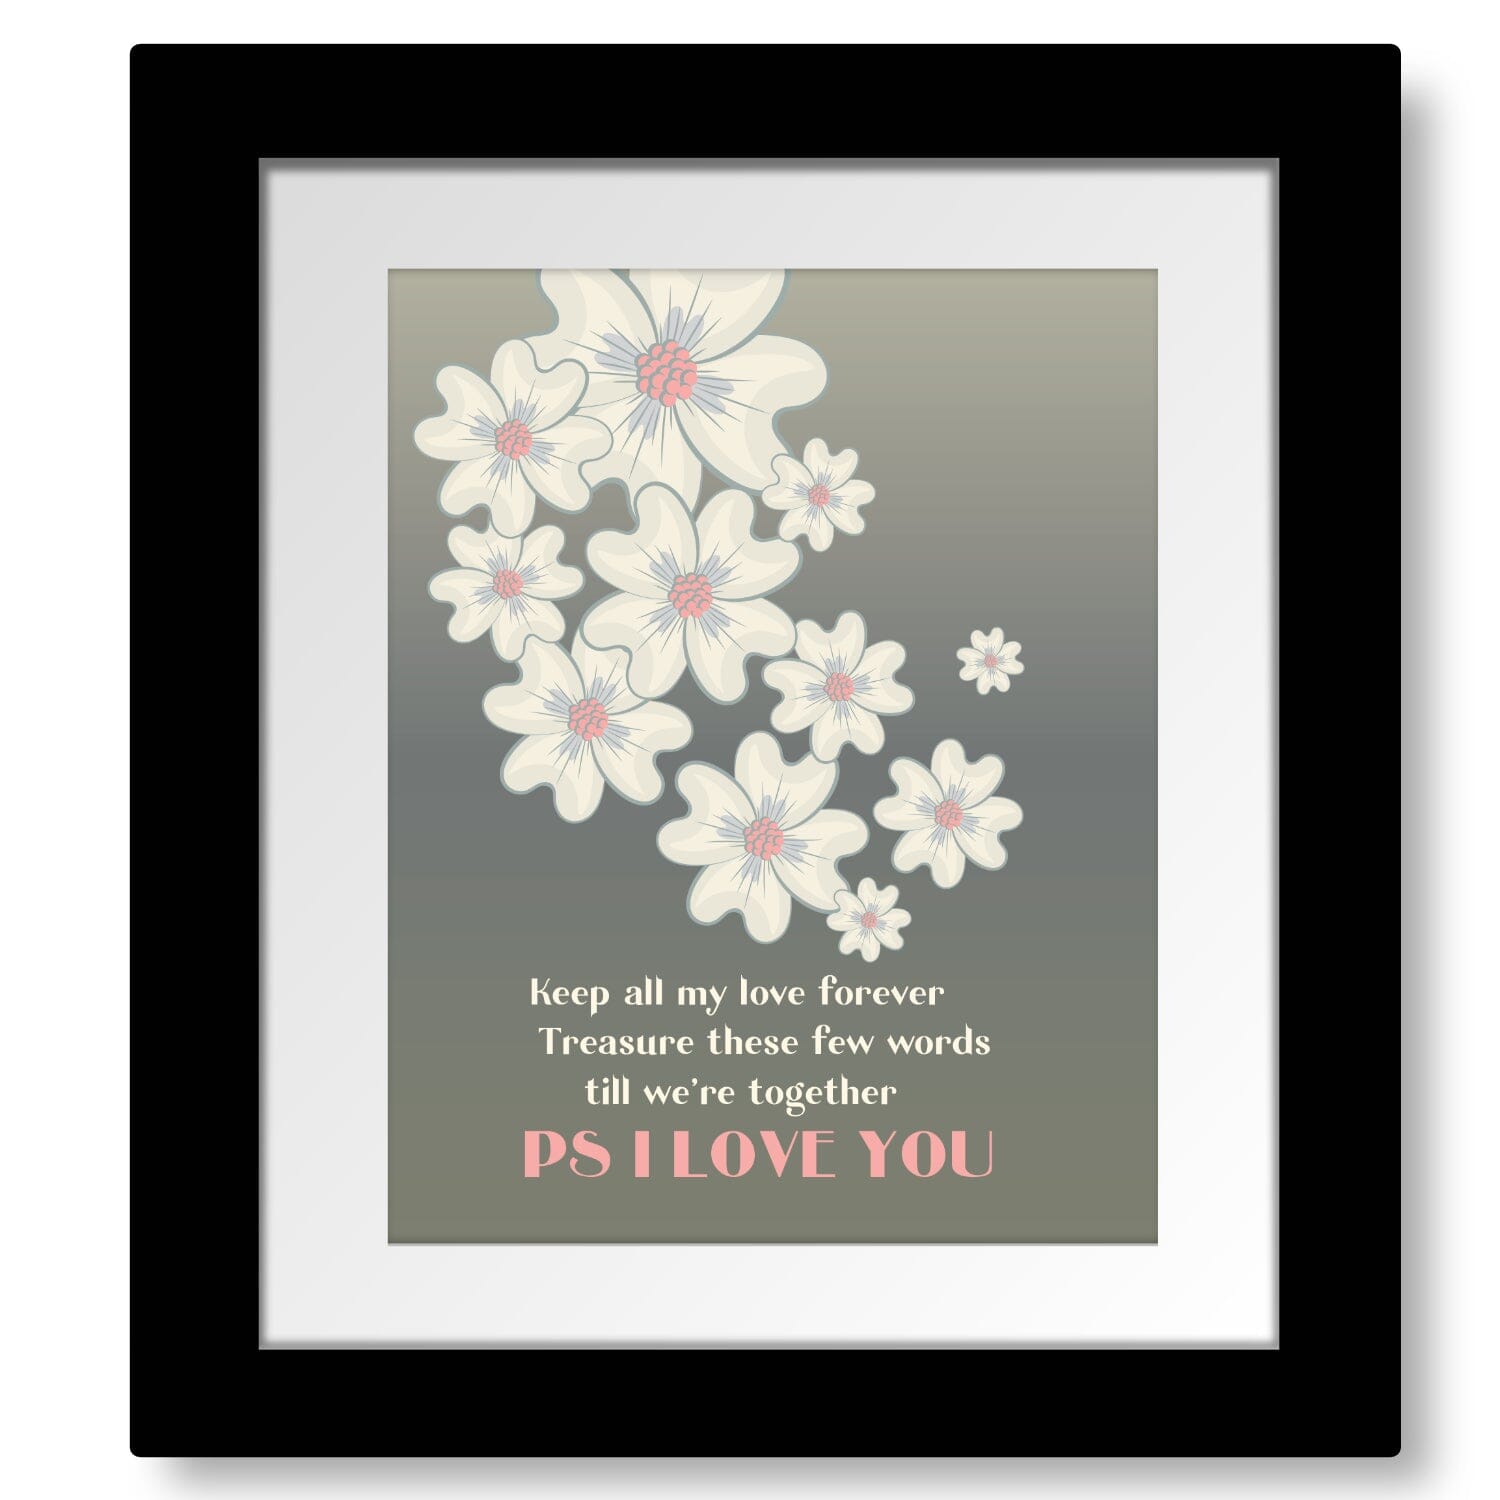 PS I Love You by Beatles - Music Memorabilia Love Song Art Song Lyrics Art Song Lyrics Art 8x10 Matted and Framed Print 